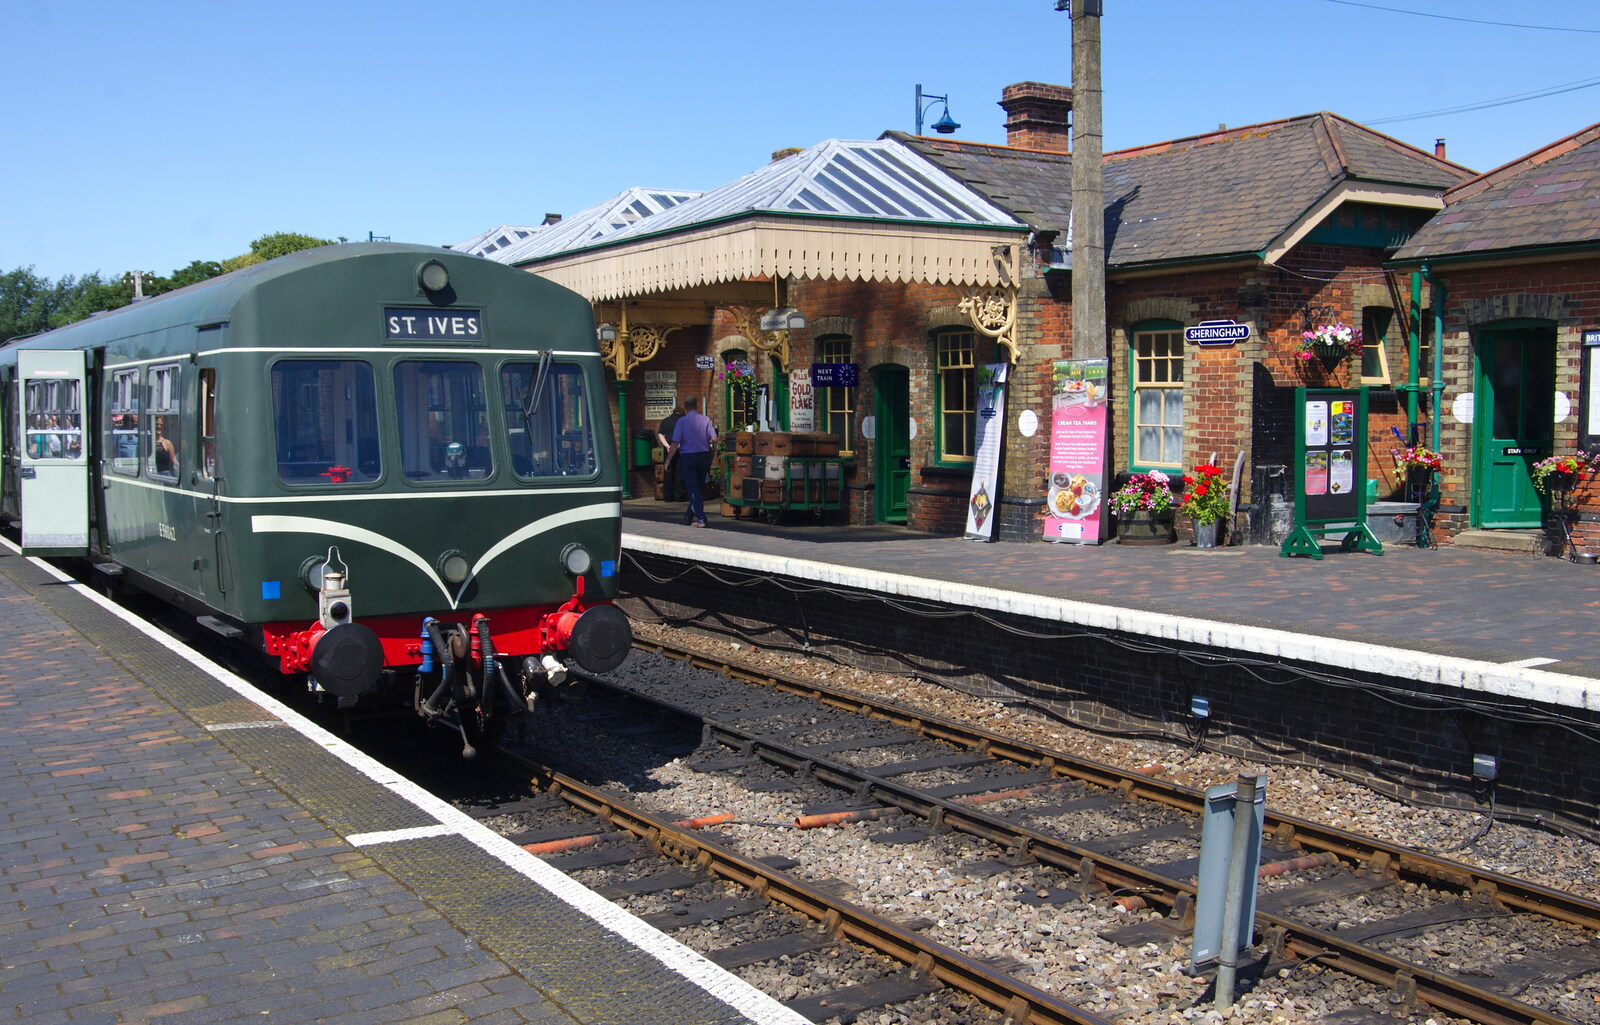 The 1959 Diesel DMU at Sheringham from Kelling Camping and the Potty Morris Festival, Sheringham, North Norfolk - 6th July 2019